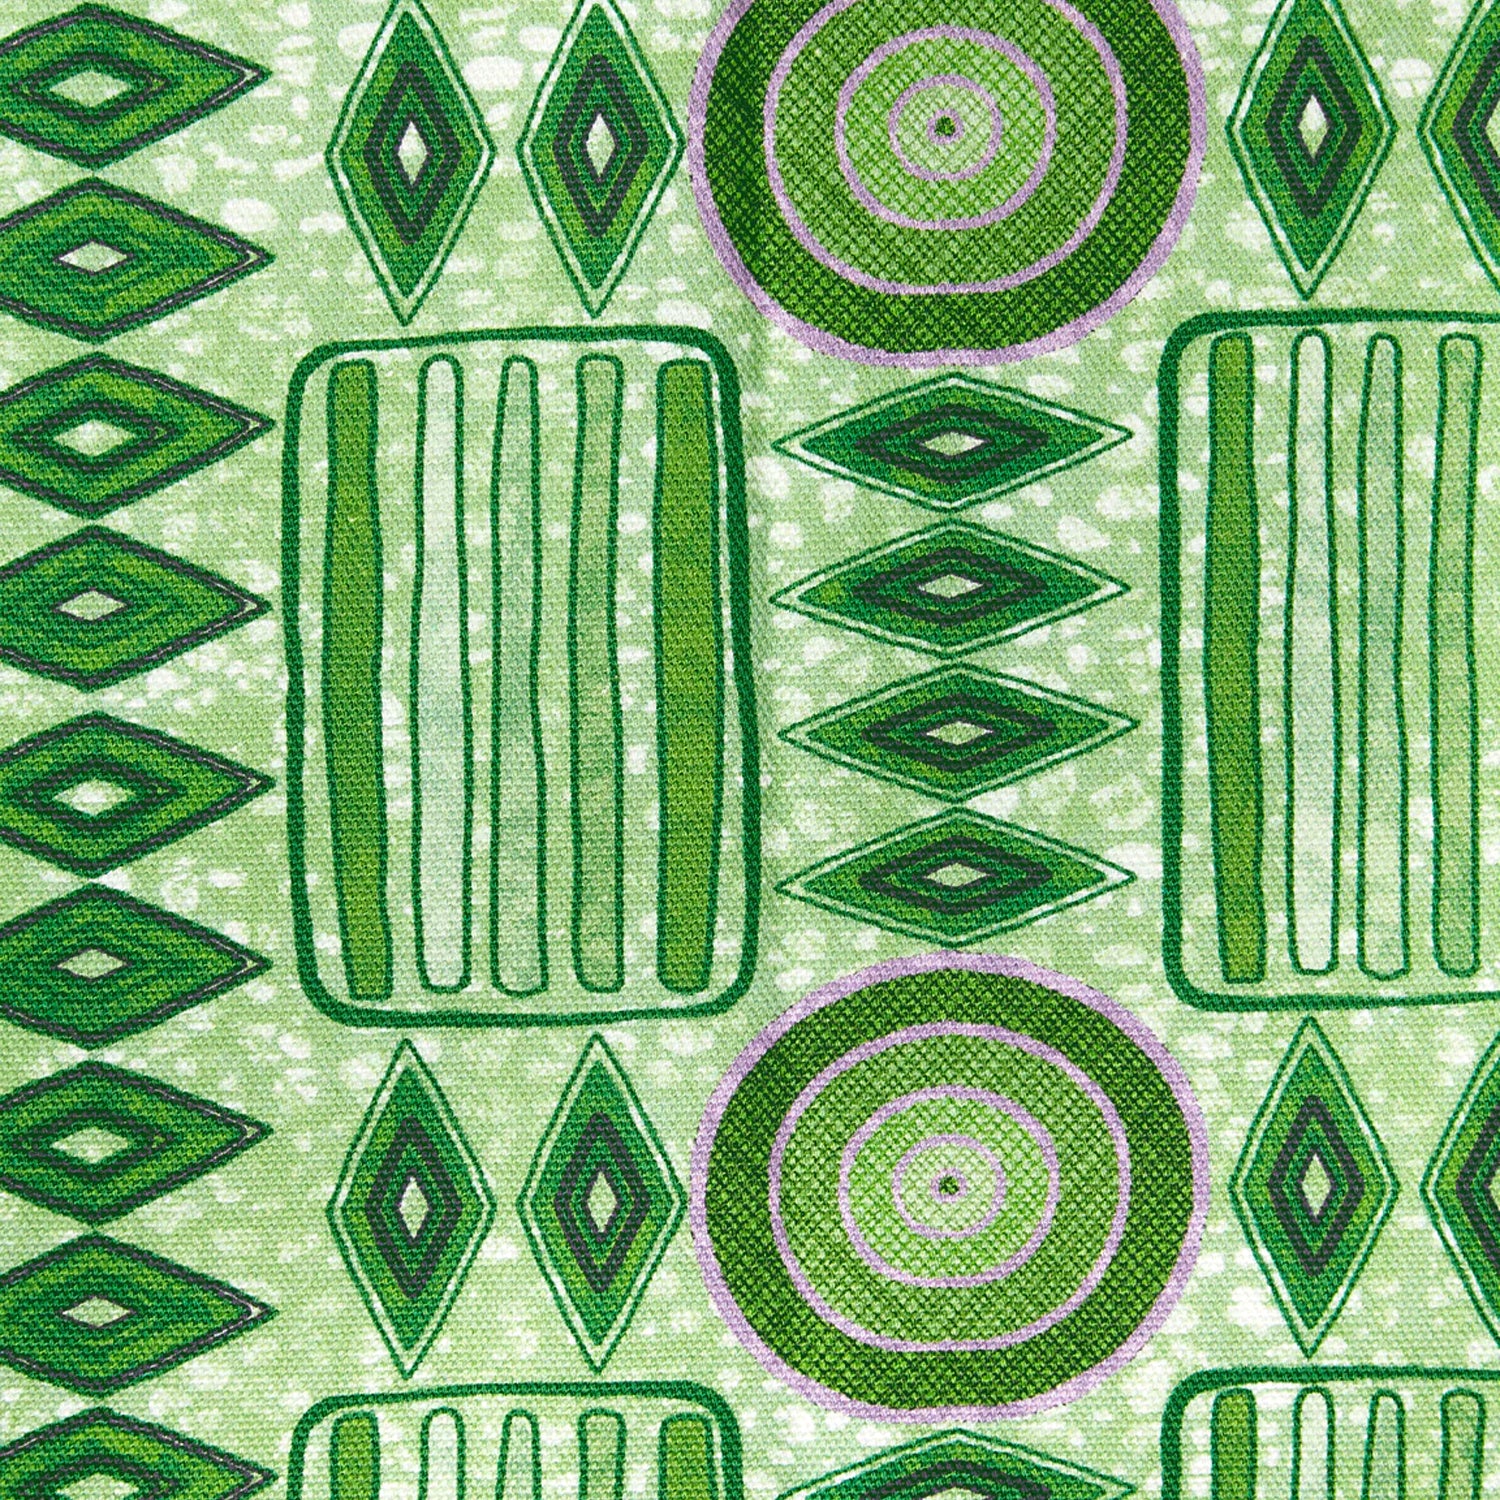 Detail of fabric in a playful geometric stripe print in shades of green with purple accents.